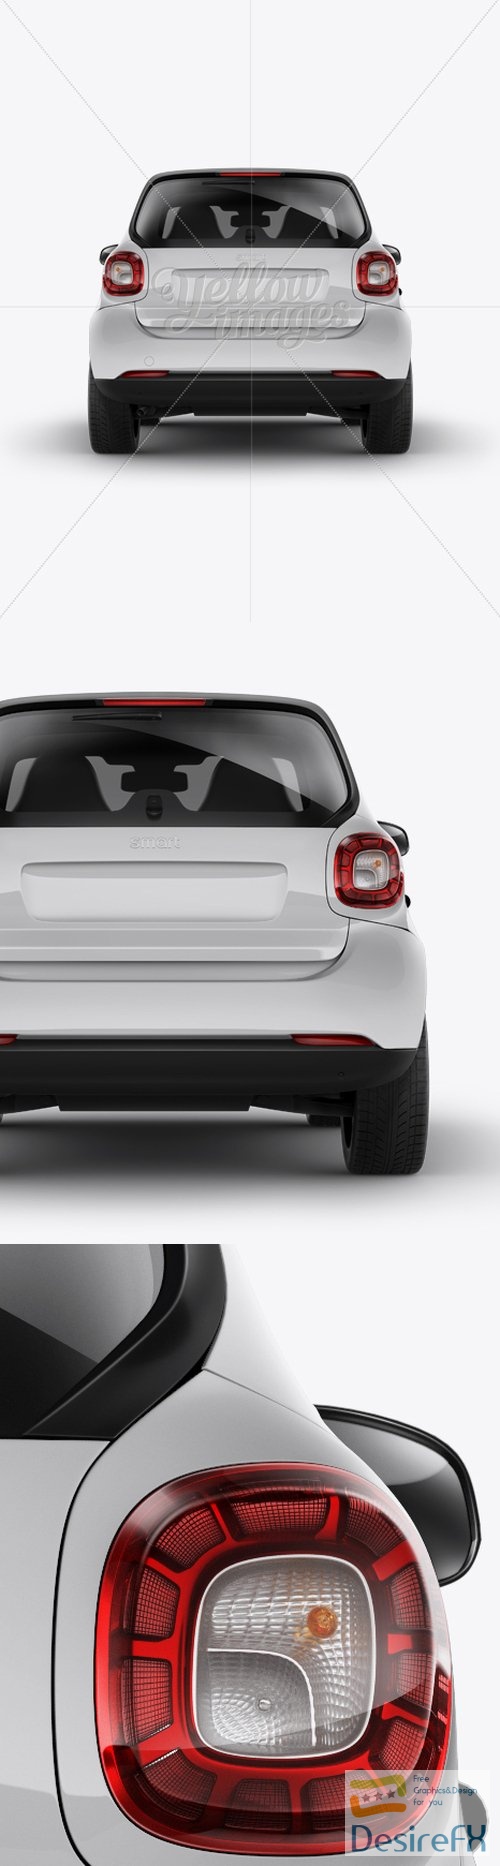 Smart Fortwo Mockup - Back View 14064